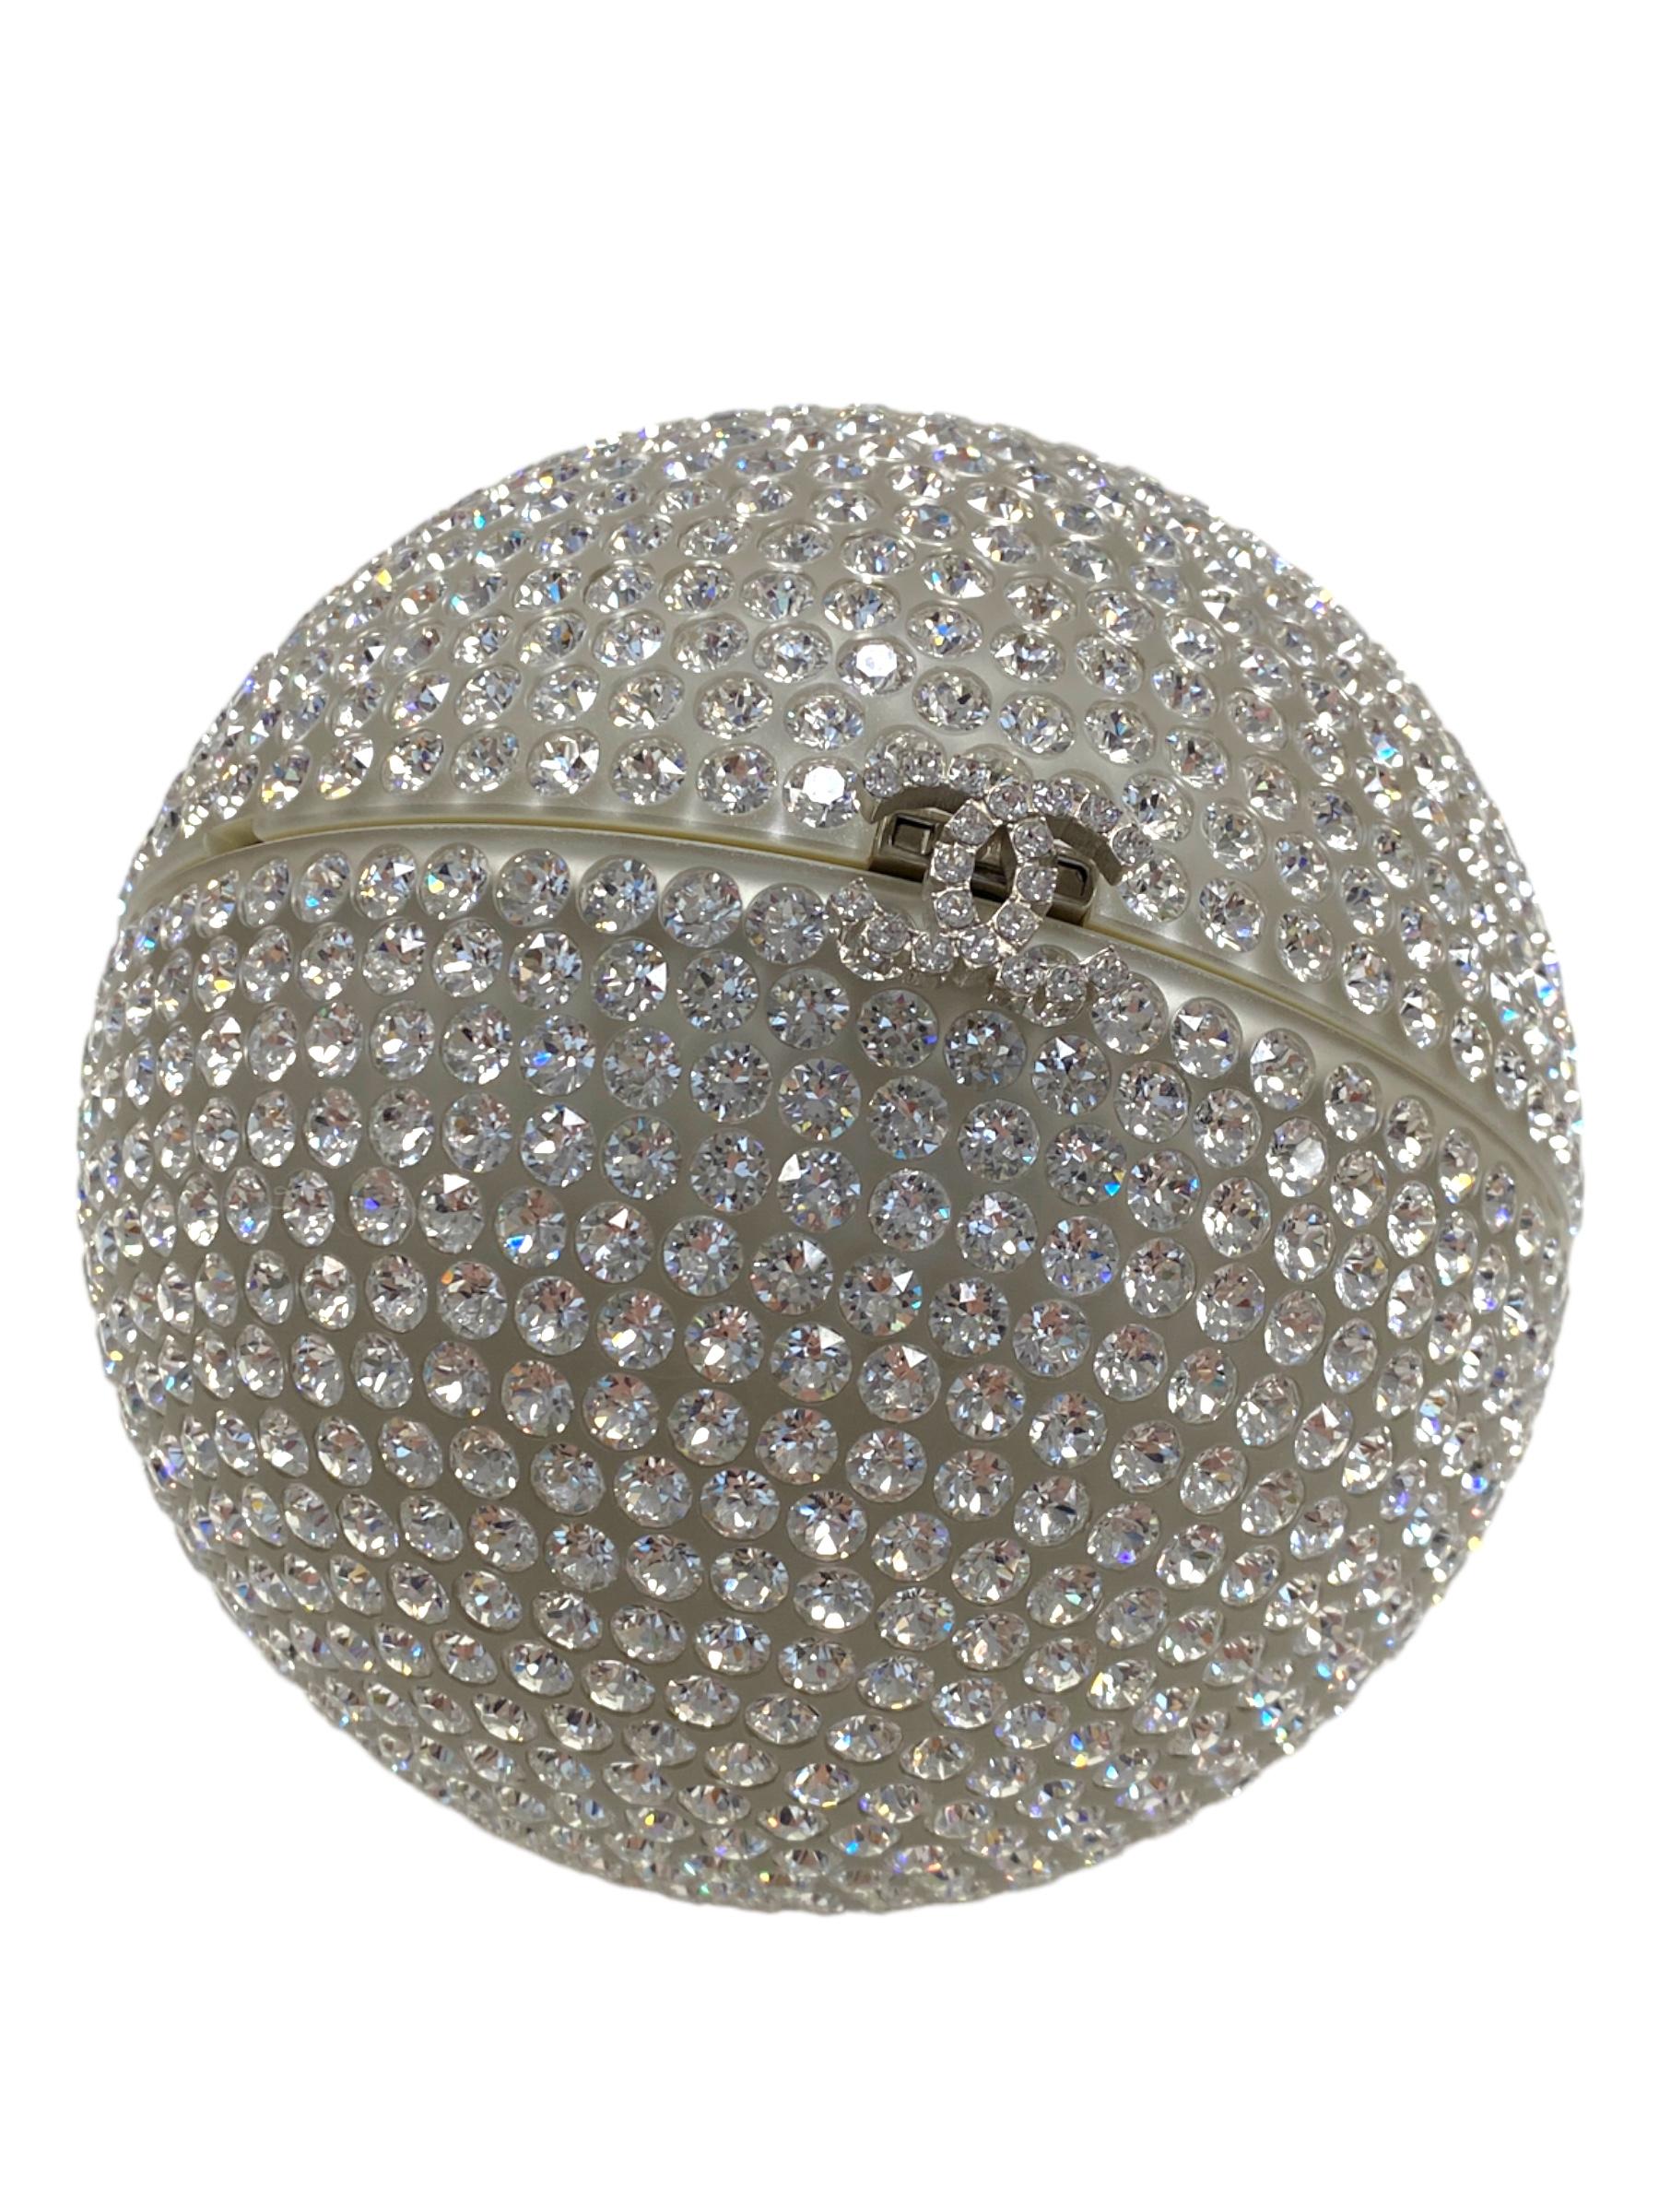 Chanel Minaudière Limited Edition Crystal Ball Evening Clutch In Excellent Condition In Sydney, New South Wales